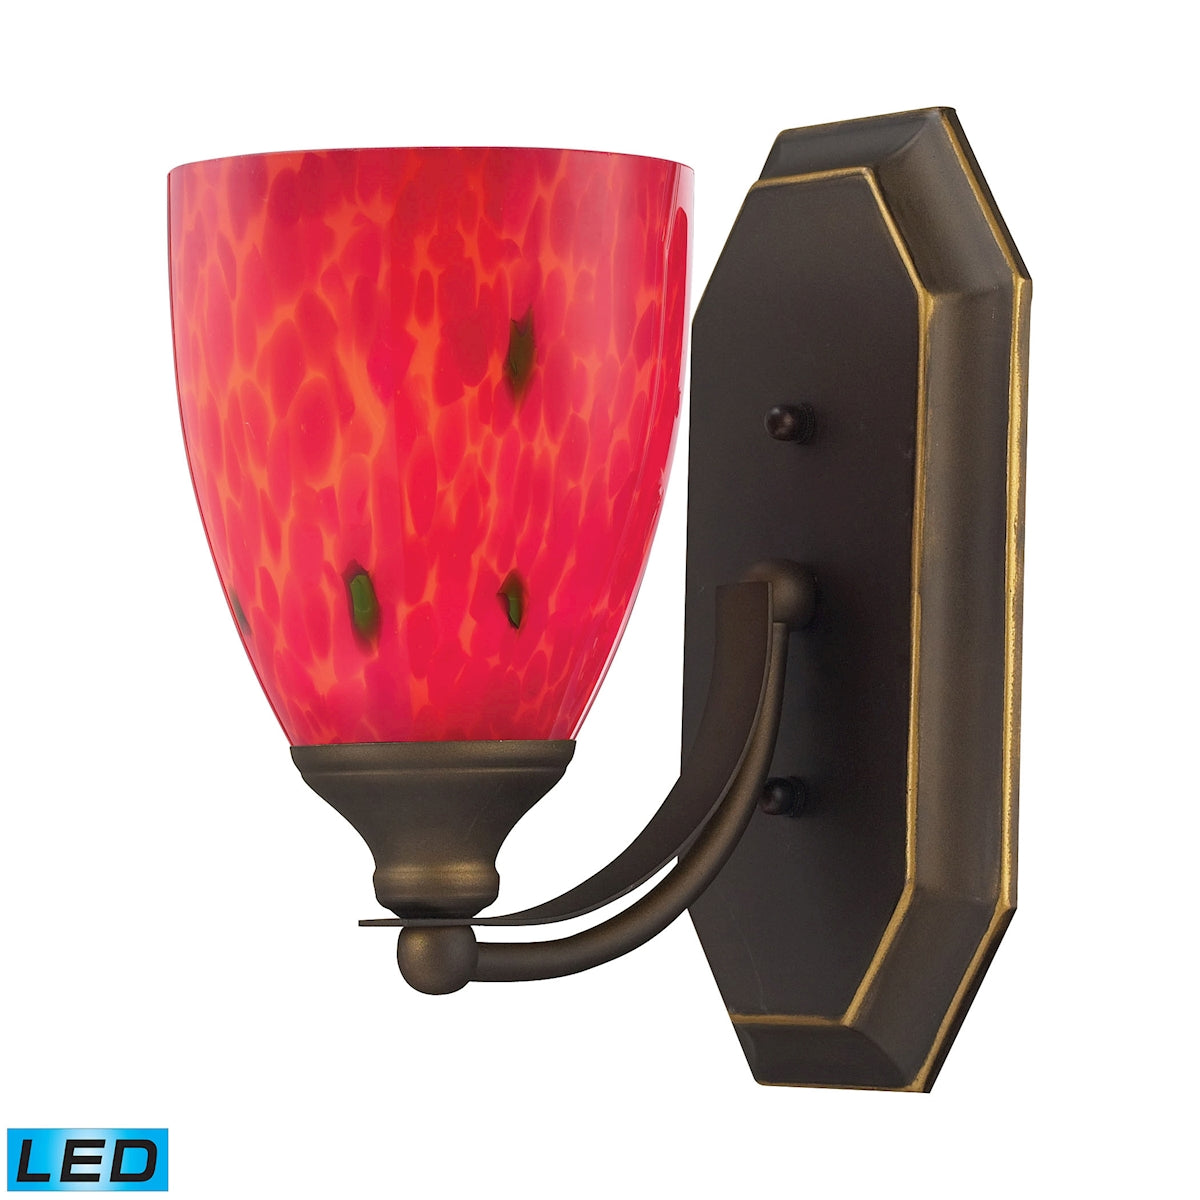 ELK Lighting 570-1B-FR-LED Mix-N-Match Vanity 1-Light Wall Lamp in Aged Bronze with Fire Red Glass - Includes LED Bulb